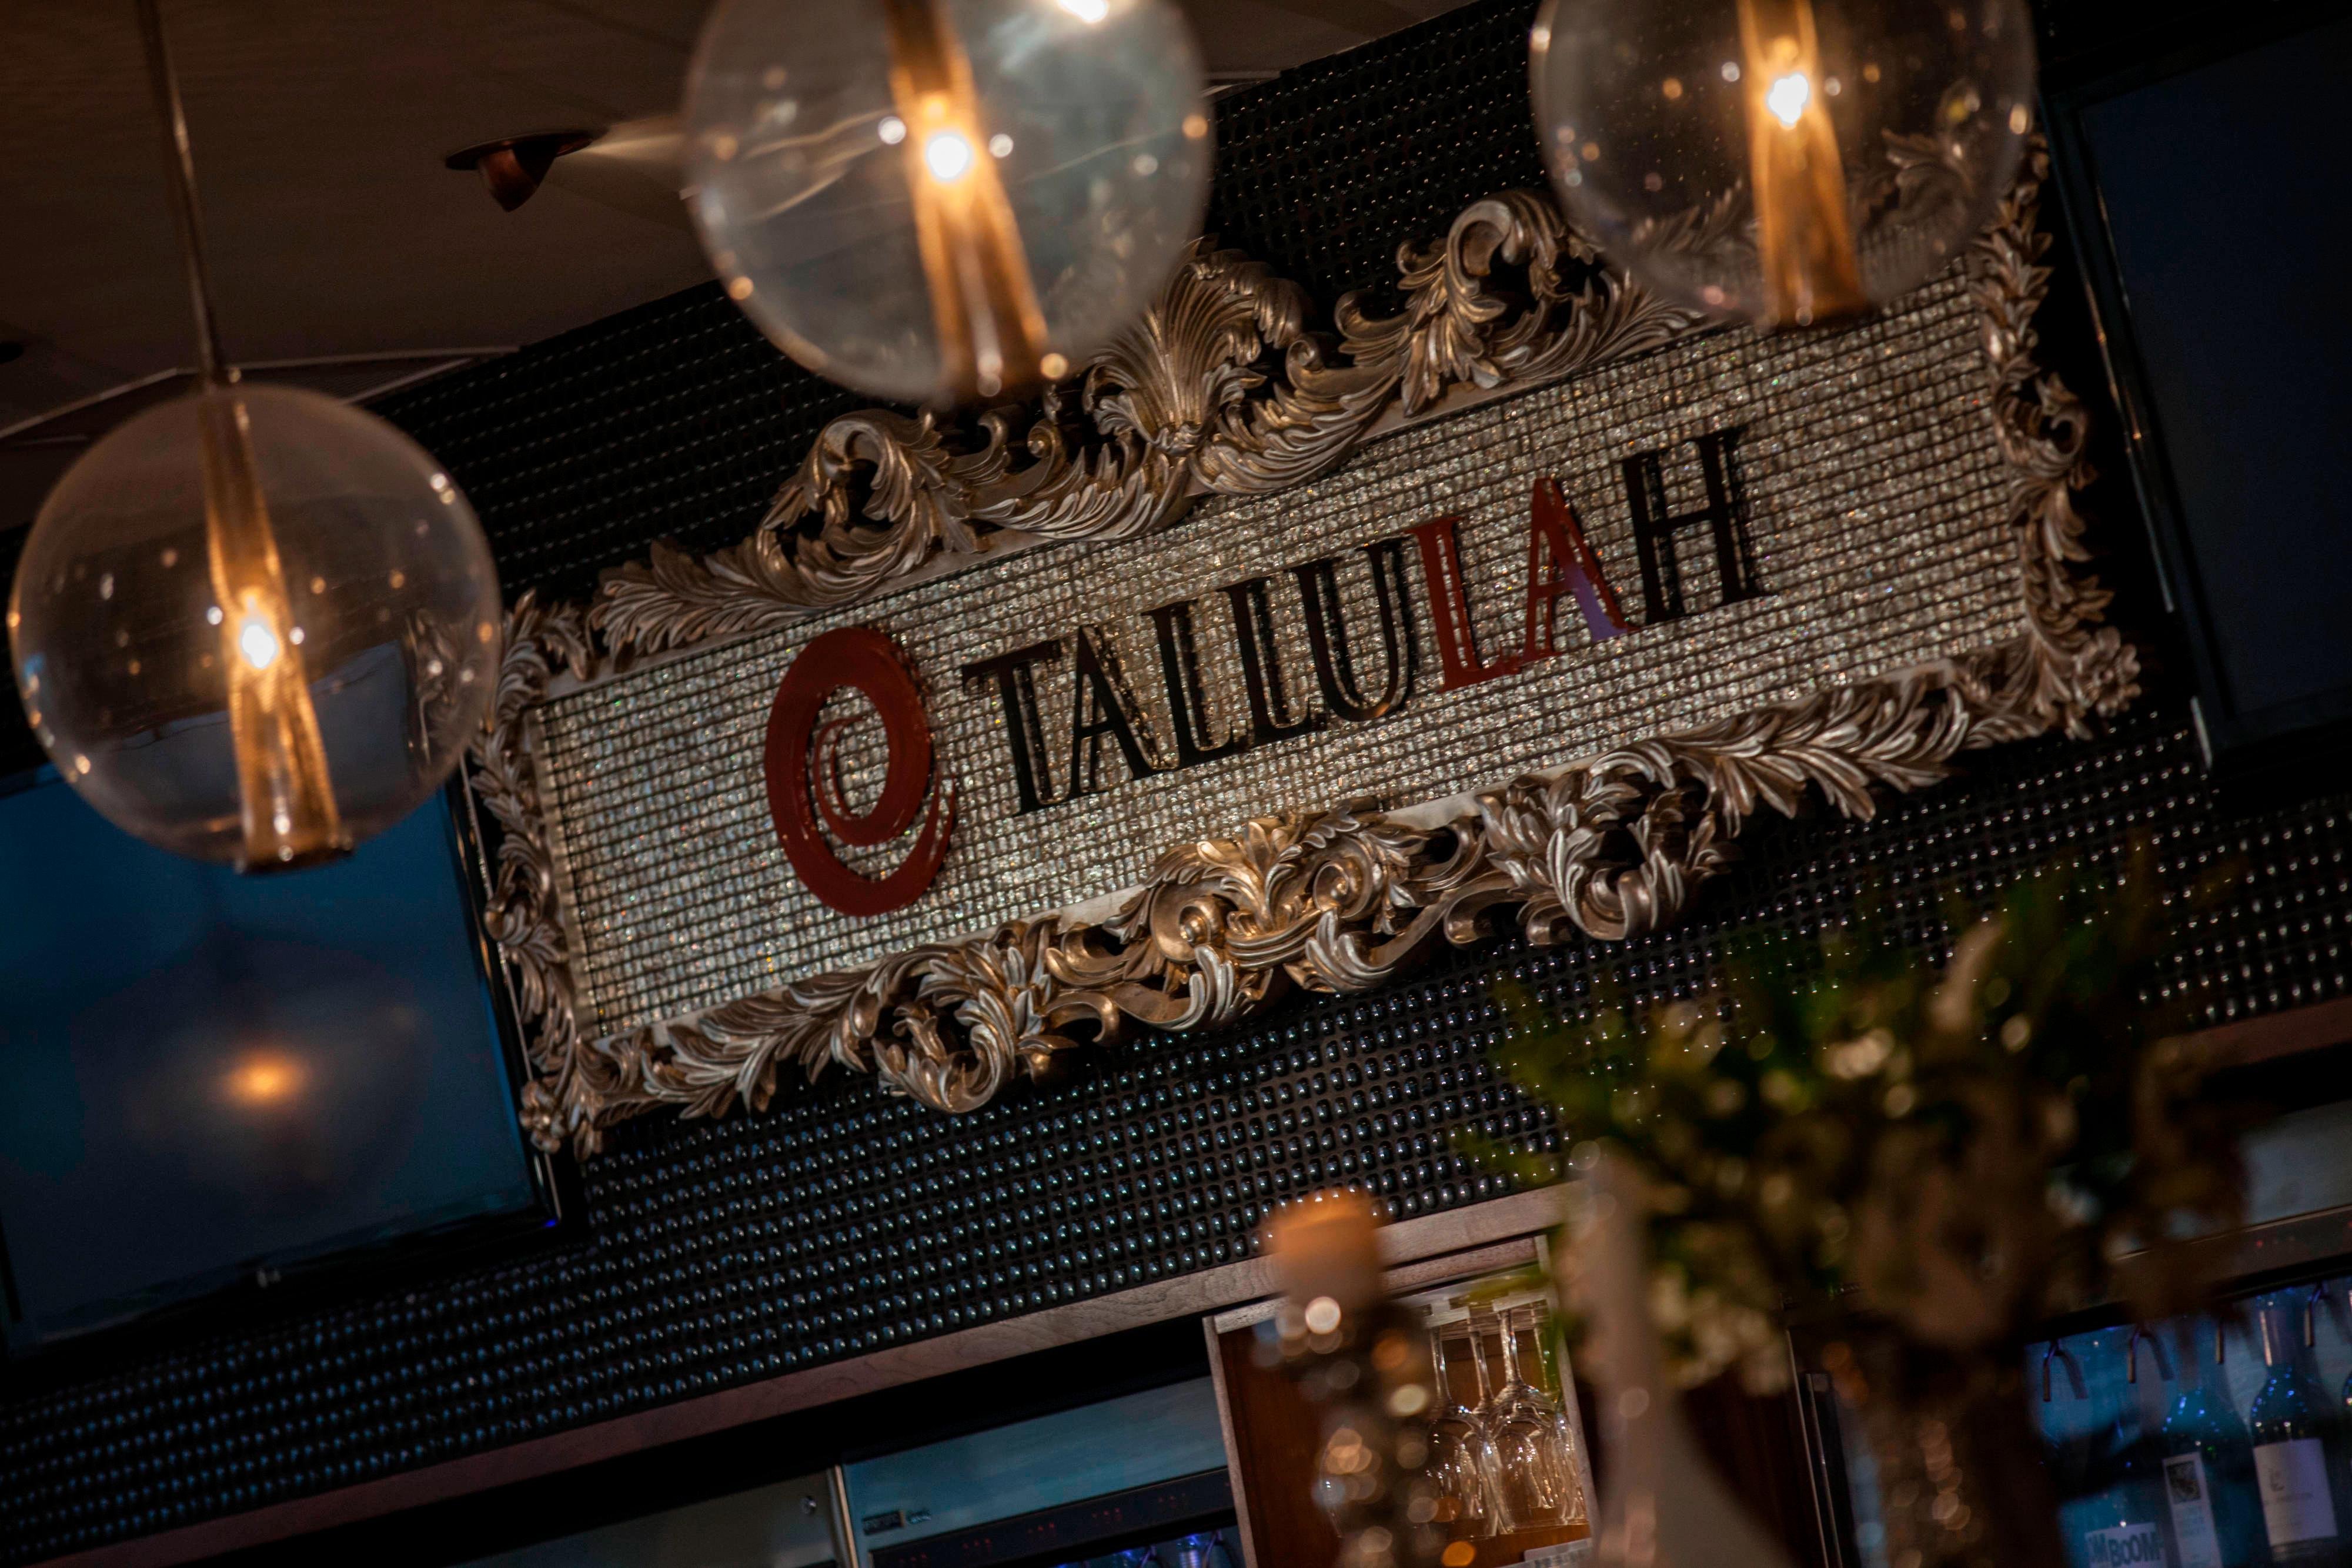 Tallulah Crafted Food and Wine Bar